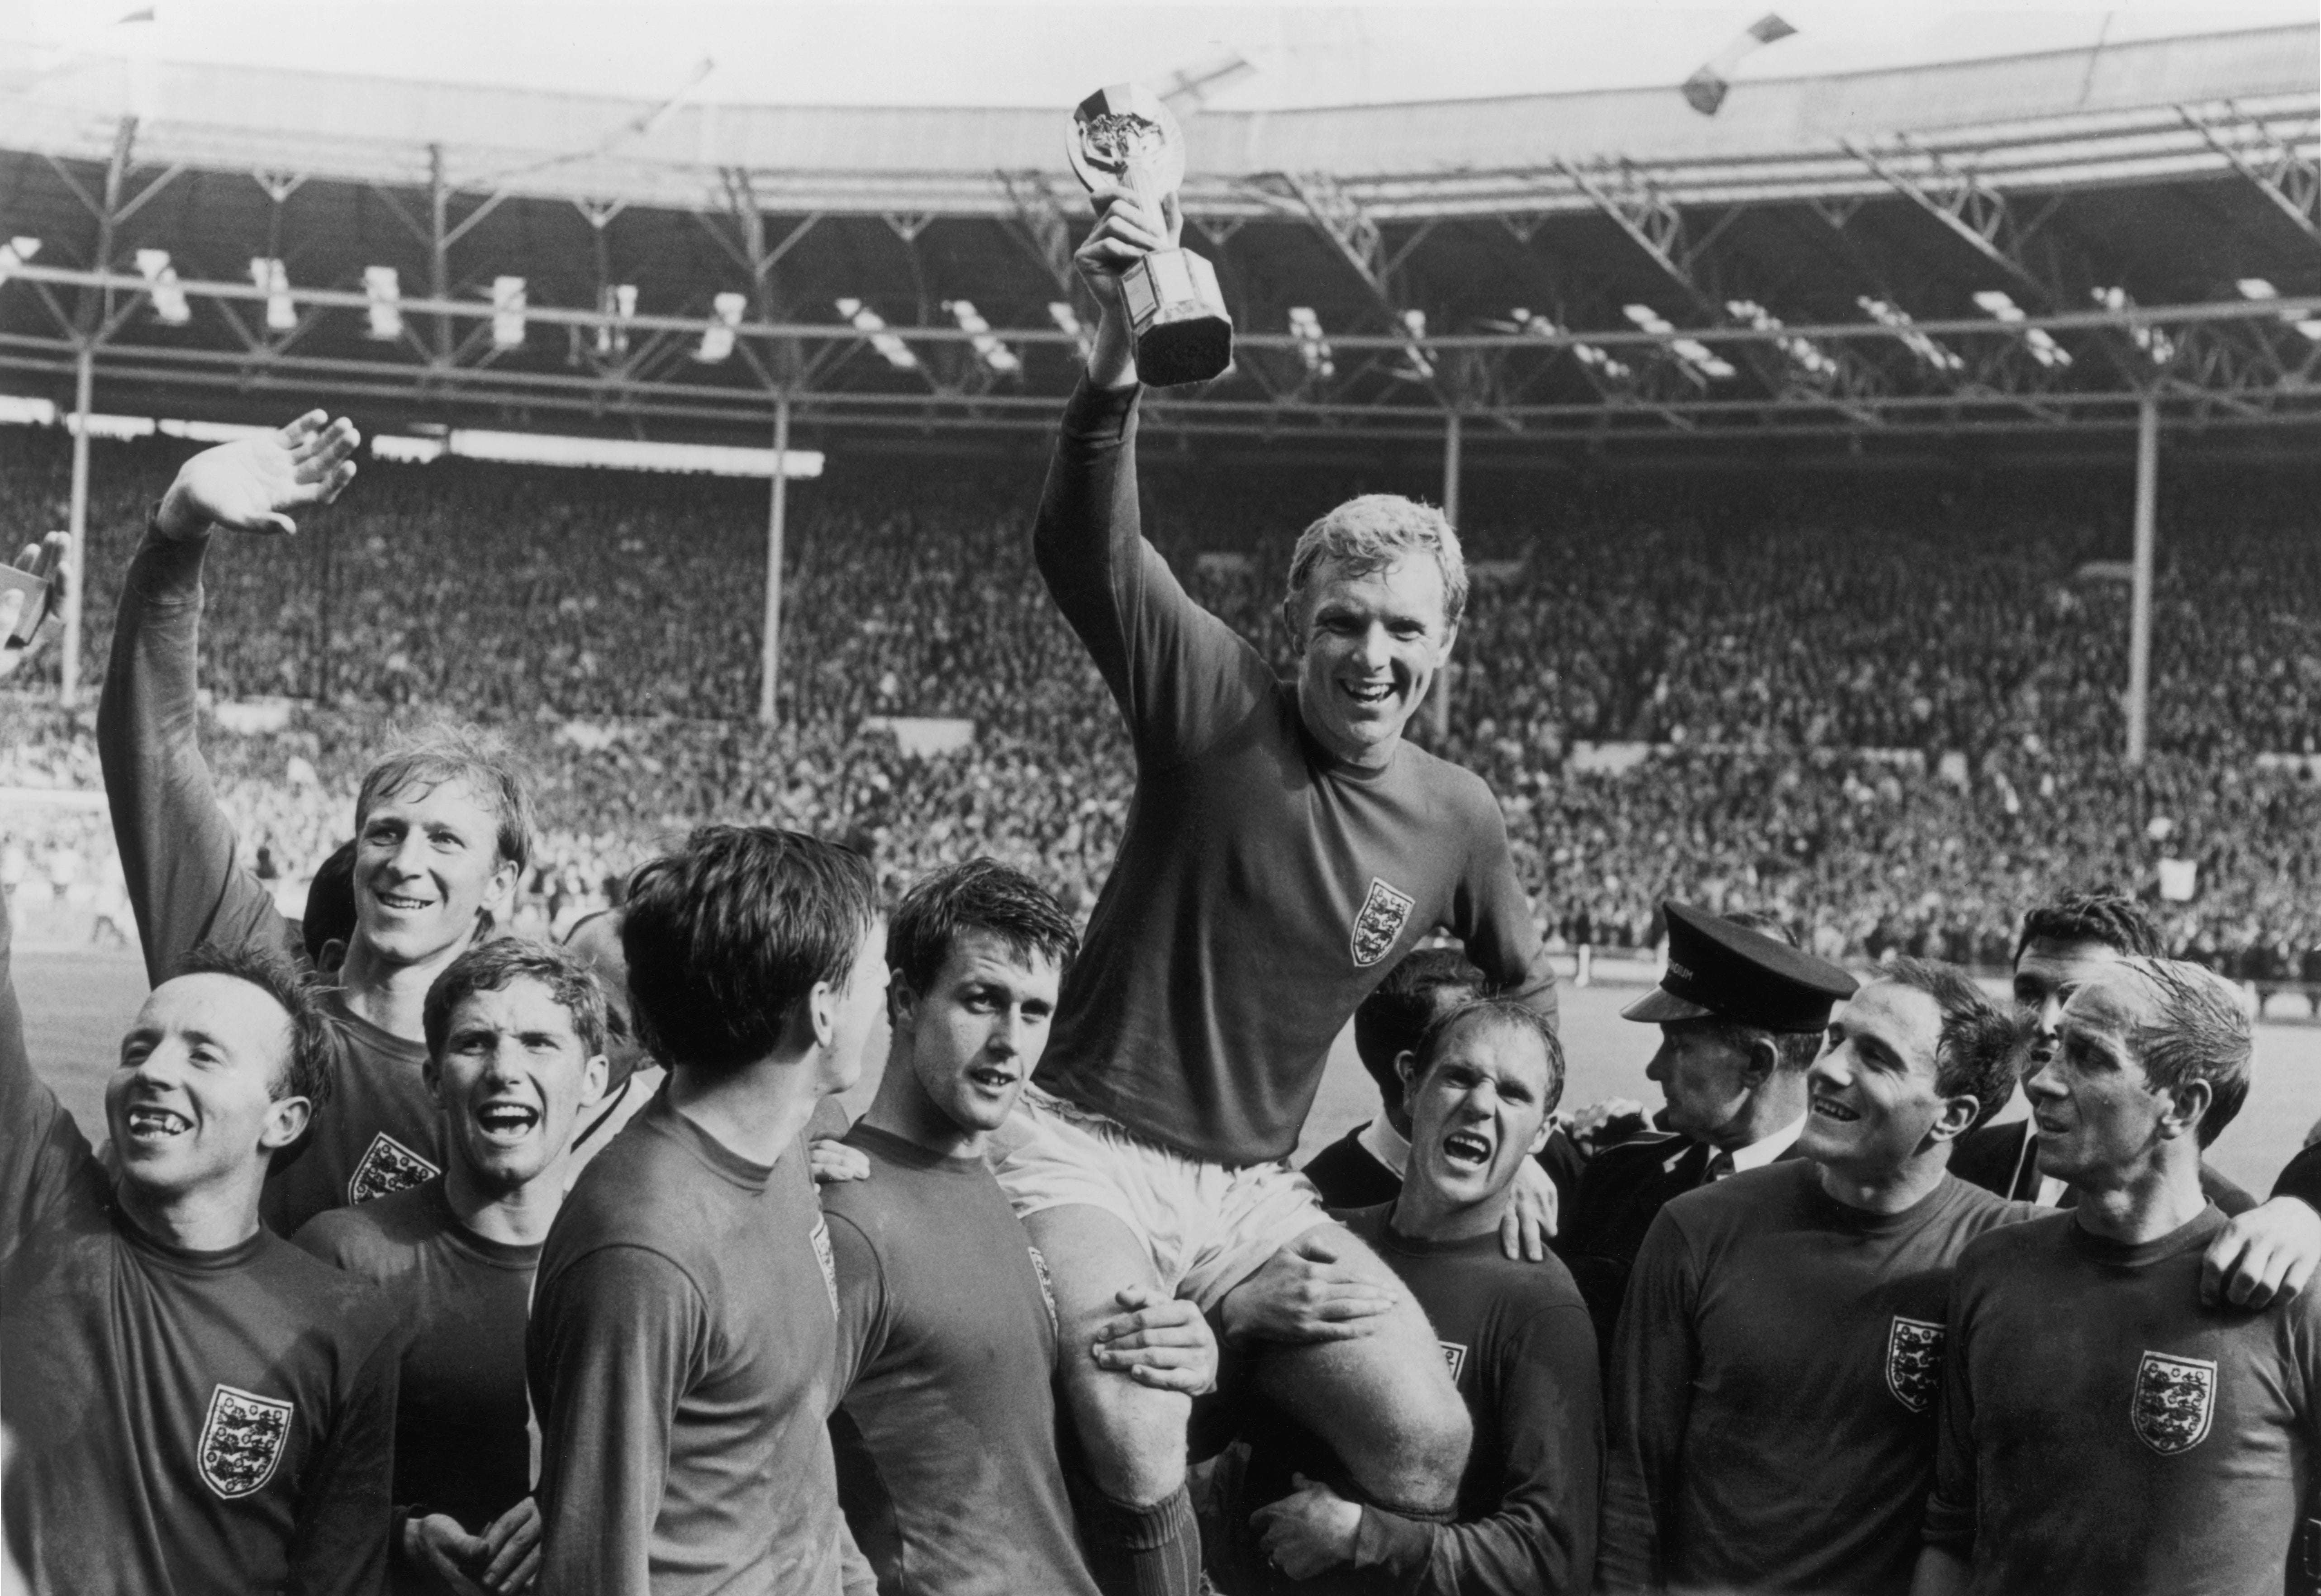 England winning the World Cup in 1966 came out as the top event people wish they’d been at